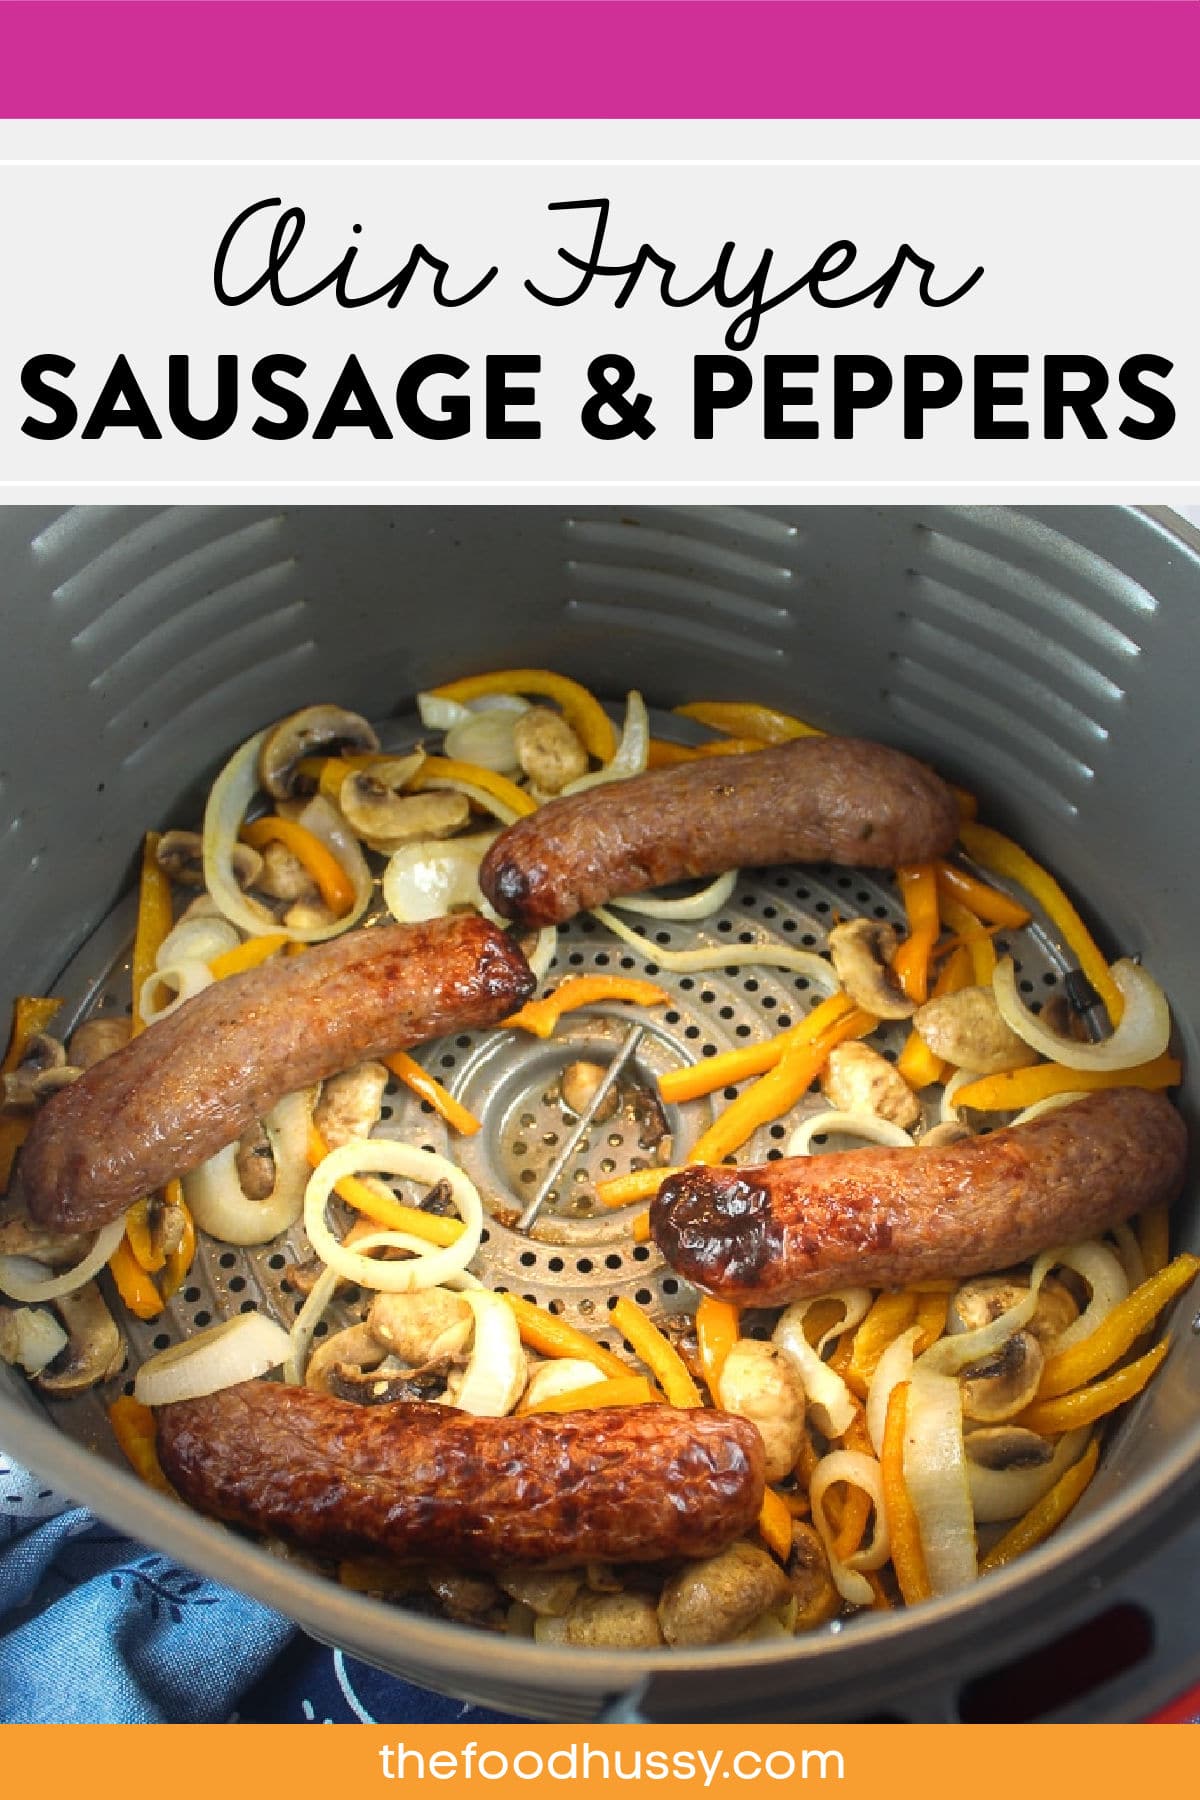 Air Fryer Sausage and Peppers is a super quick weeknight meal that’s ready in just 10 minutes! I like to add onions, peppers and mushrooms when I’m making this too. They all go together and taste great when I make Sausage Sandwiches! via @foodhussy